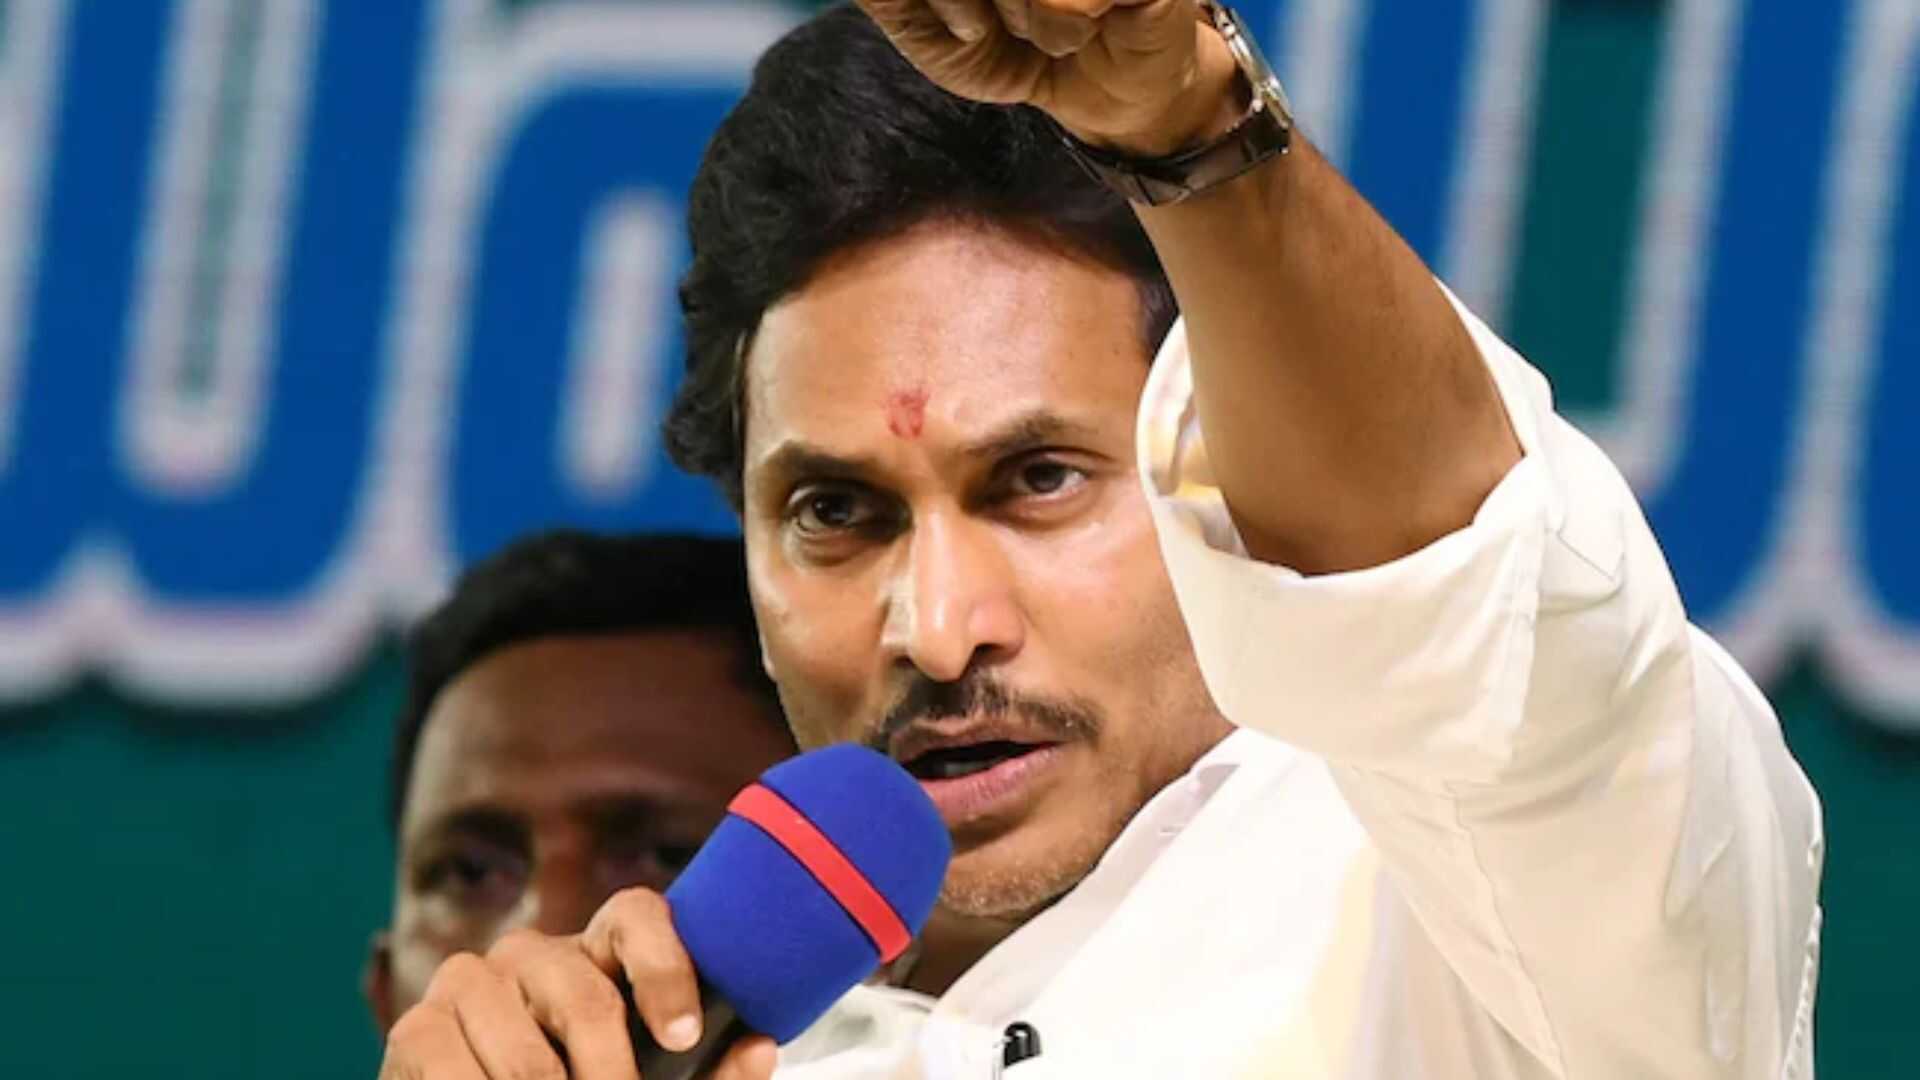 Why YSRCP Chief Jagan Mohan Reddy Lost Andhra Pradesh-Explained